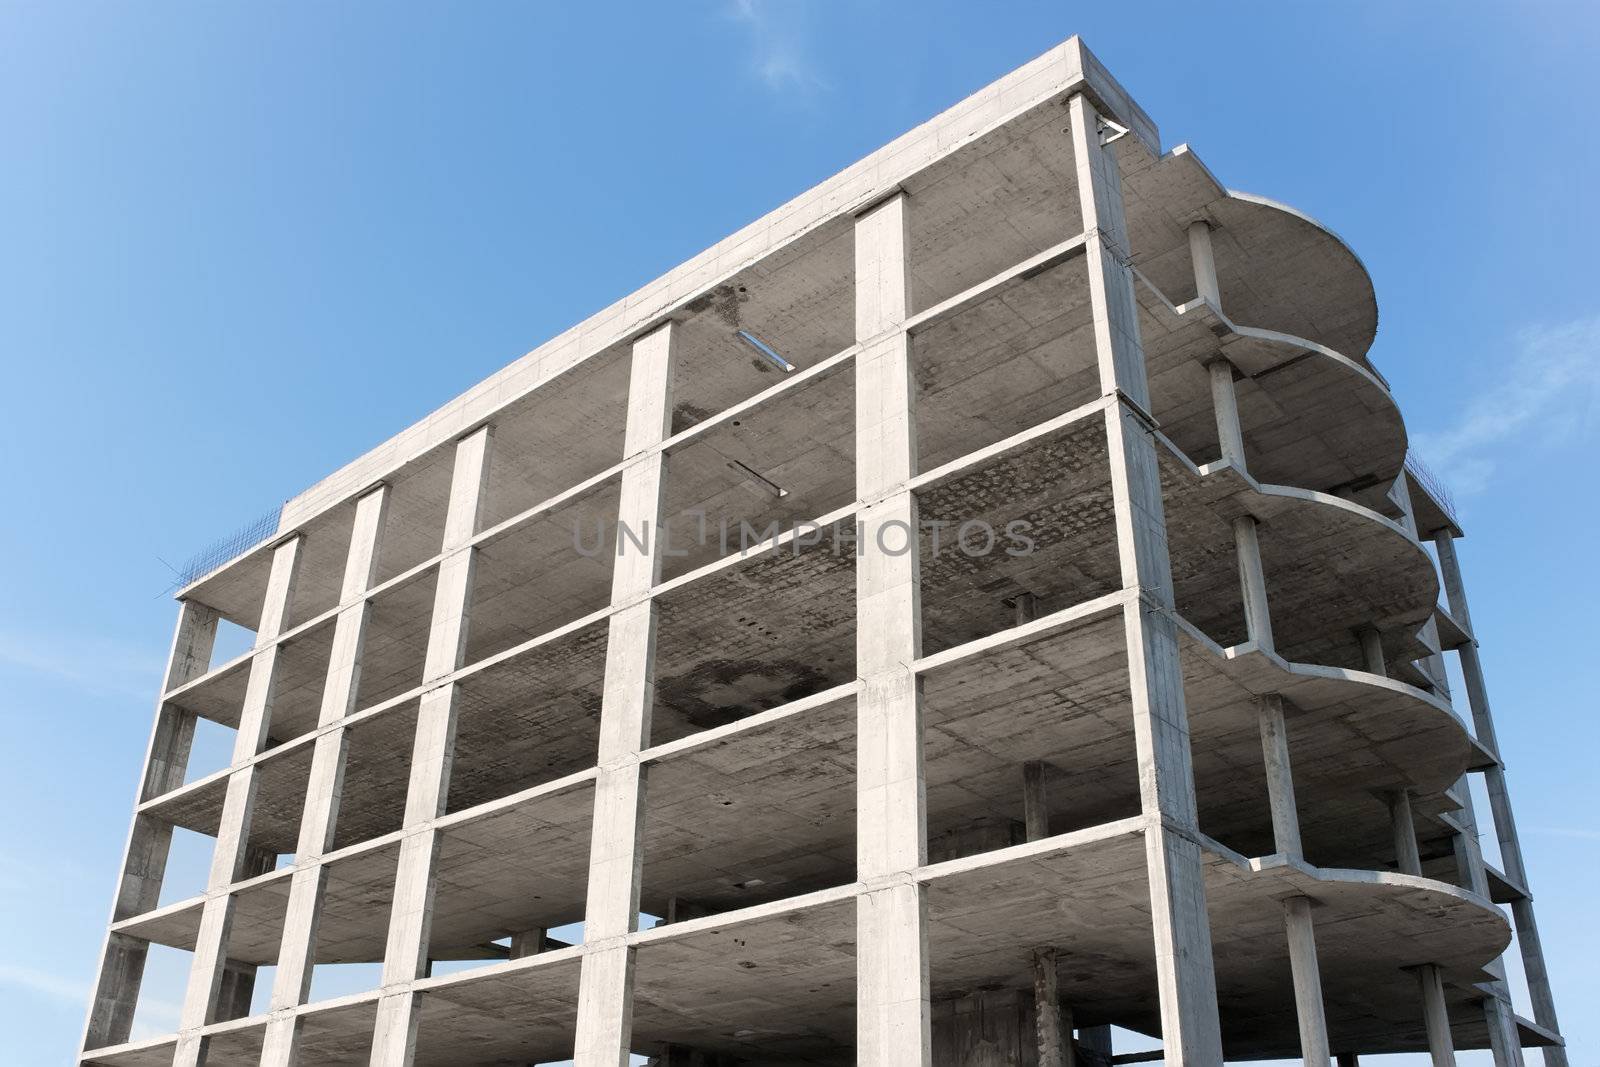 A multi-storey building construction on the background of blue sky